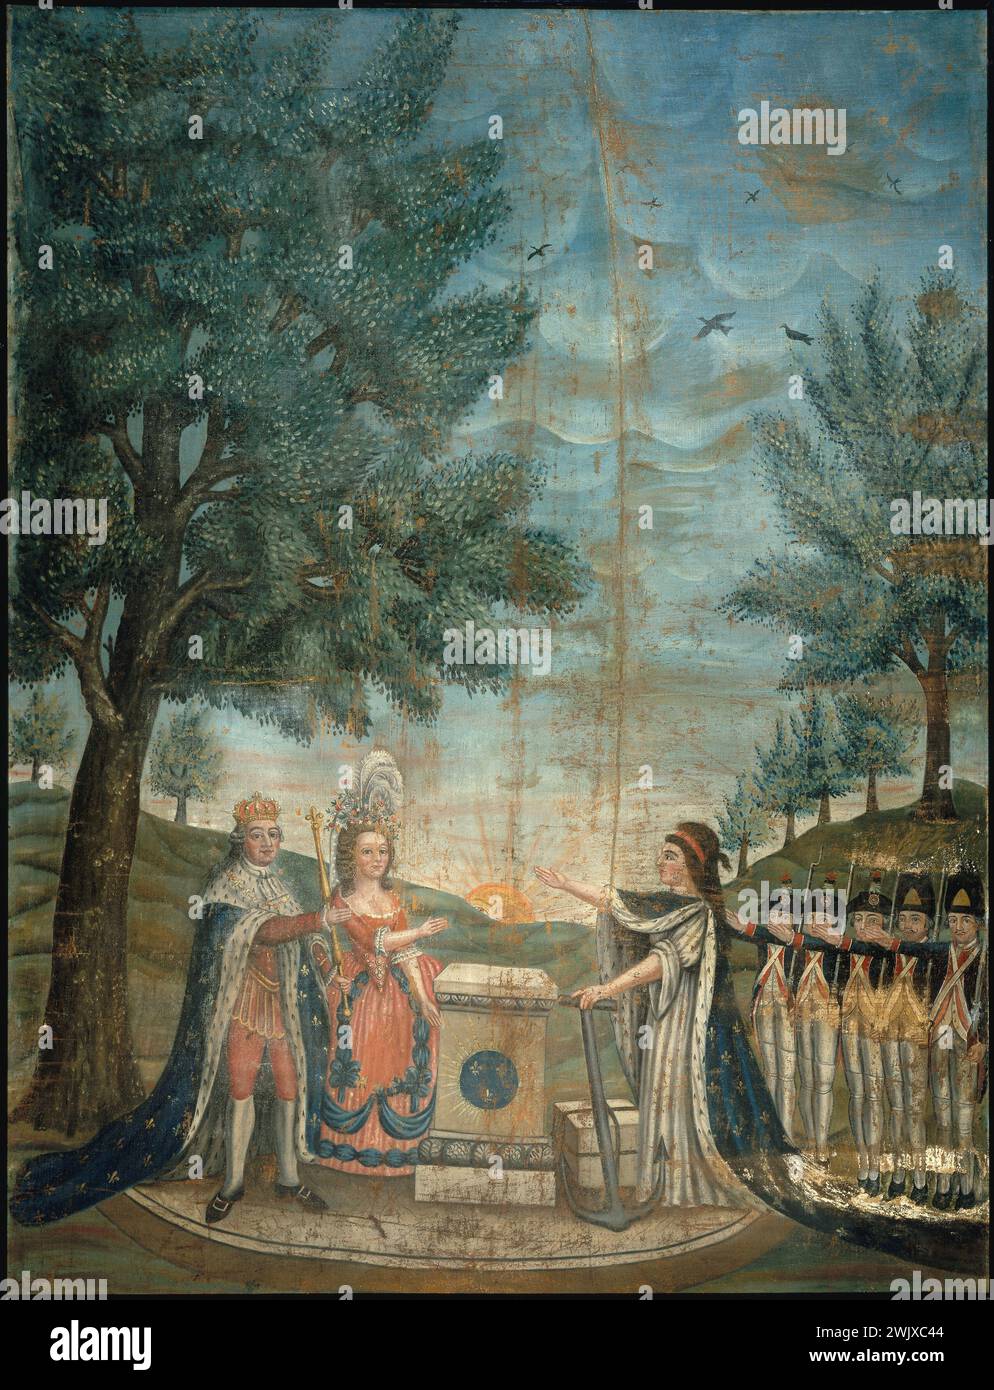 DUBOIS. 'Oath of the King, the Queen and the National Guard to the Fatherland'. Oil on canvas. Paris, Carnavalet museum. 39431-11 Allegorie, Bourbon, National Guard, Fatherland, Preter Oath, Queen France, French Revolution, King France, Sun, Oil on canvas Stock Photo